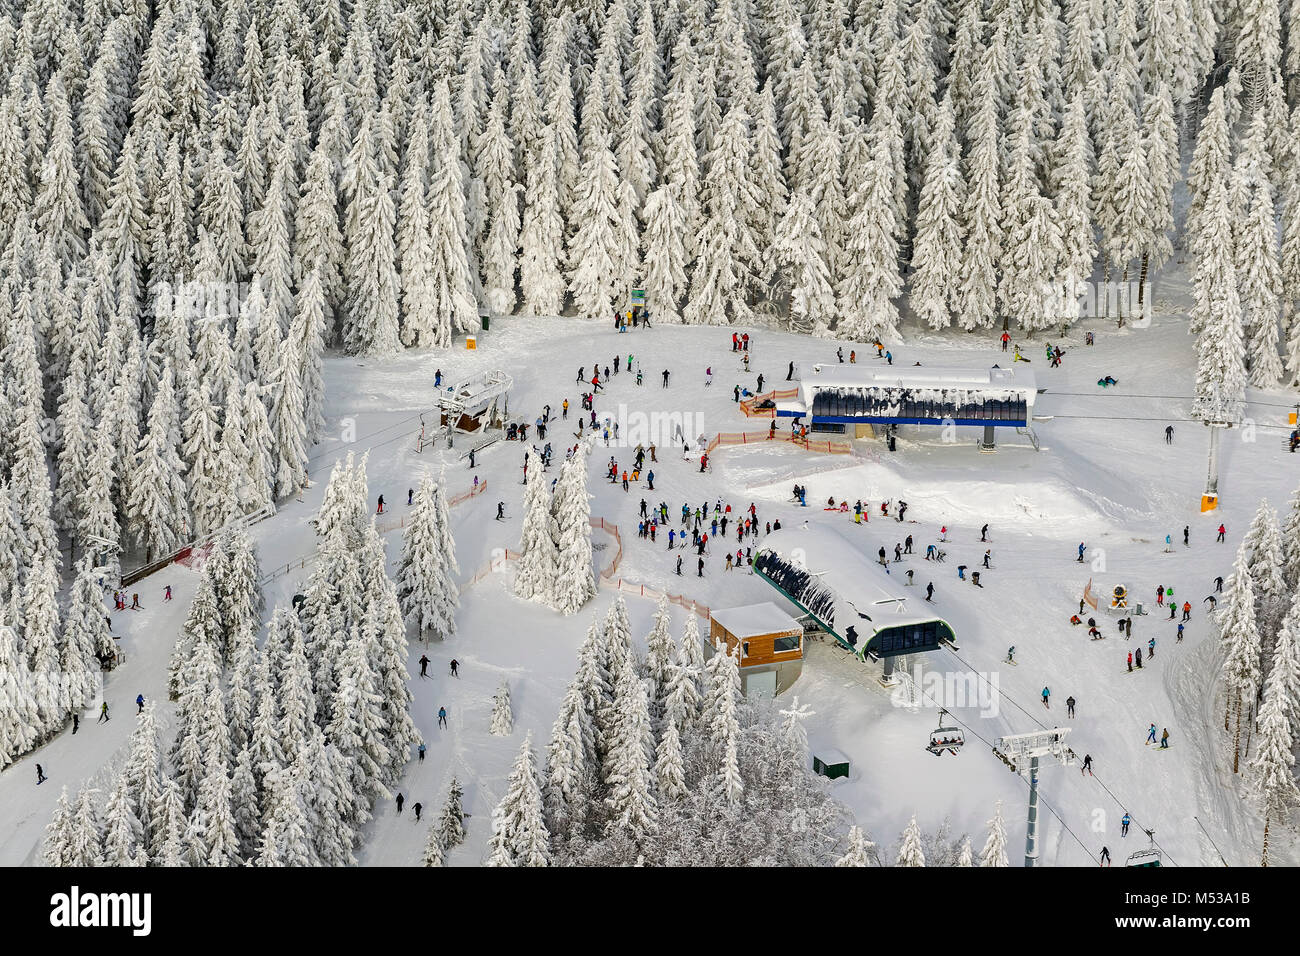 Aerial view, top station of the ski lift, snow, ski lift, snakes in front of the ski lift, winter in Winterberg, Winterberg, Sauerland, Hochsauerlandk Stock Photo